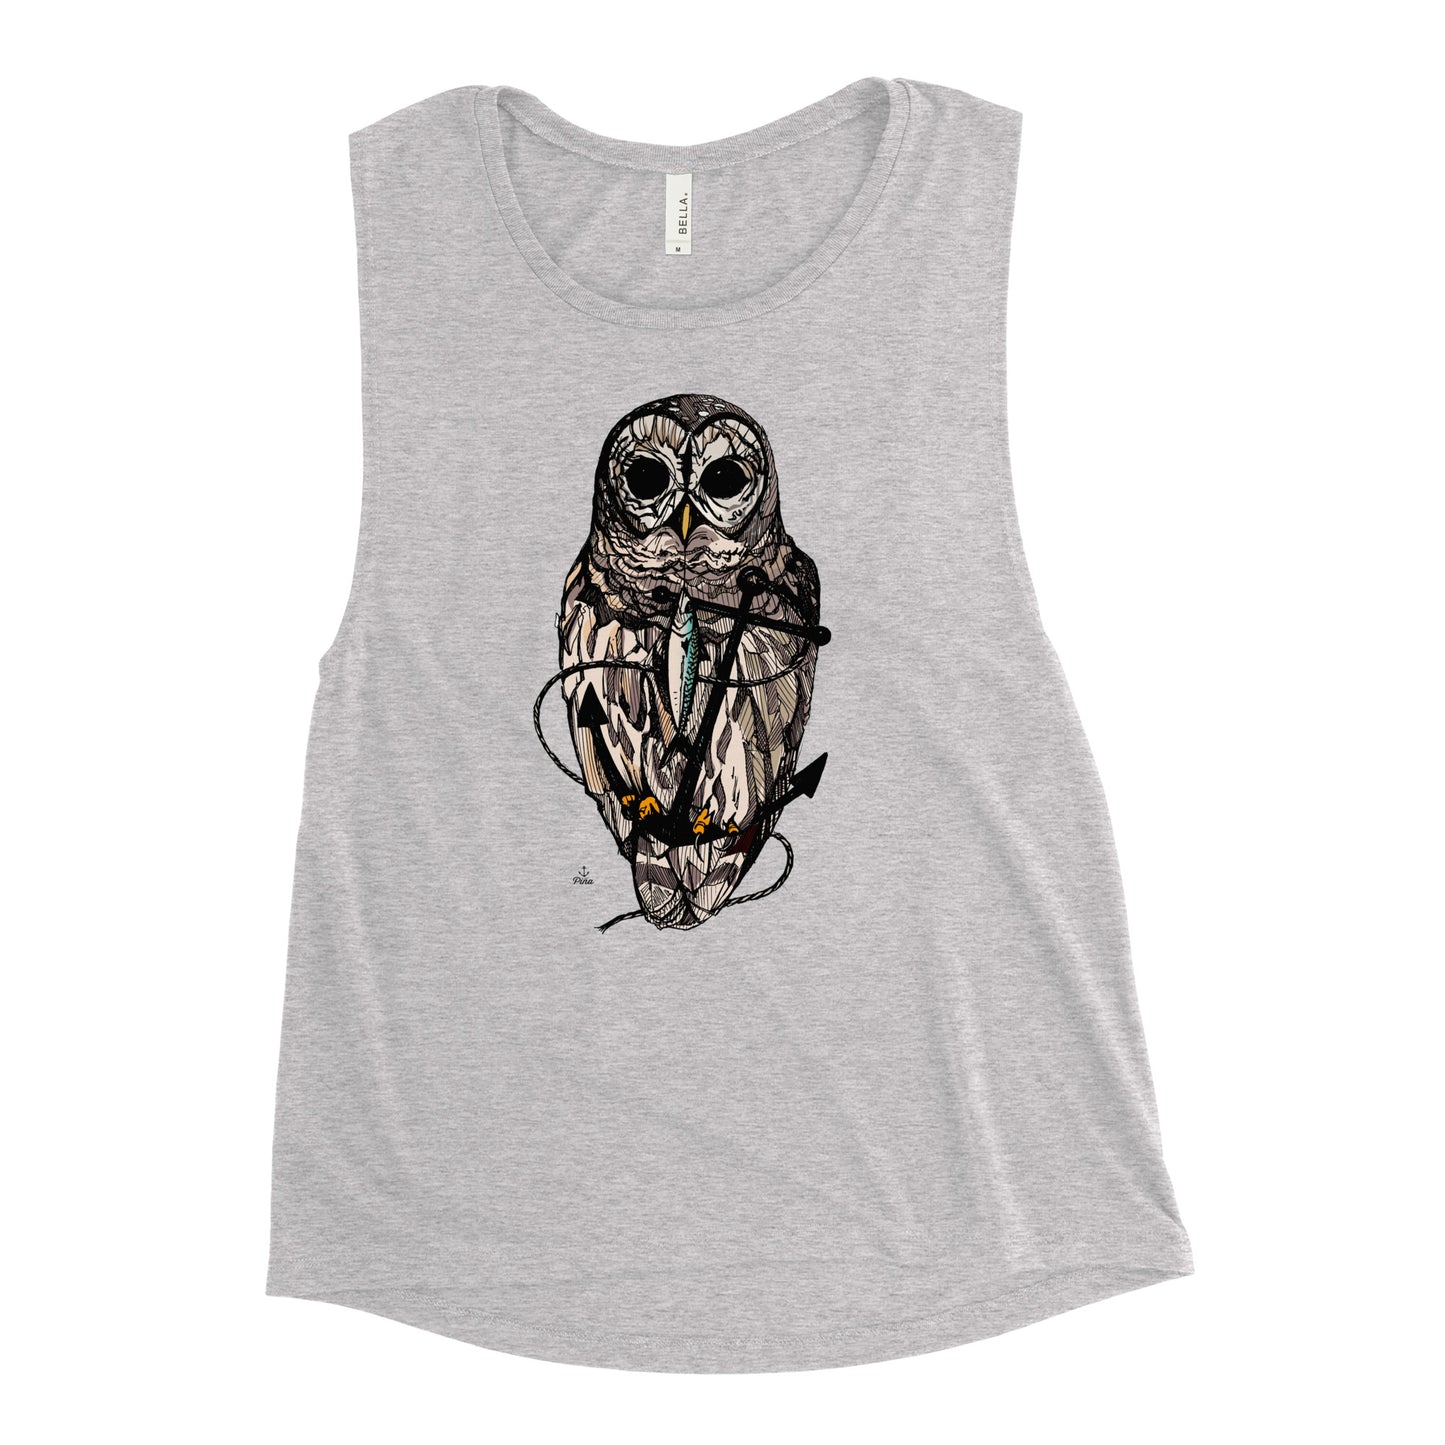 Owl & Anchor Ladies Muscle Tank